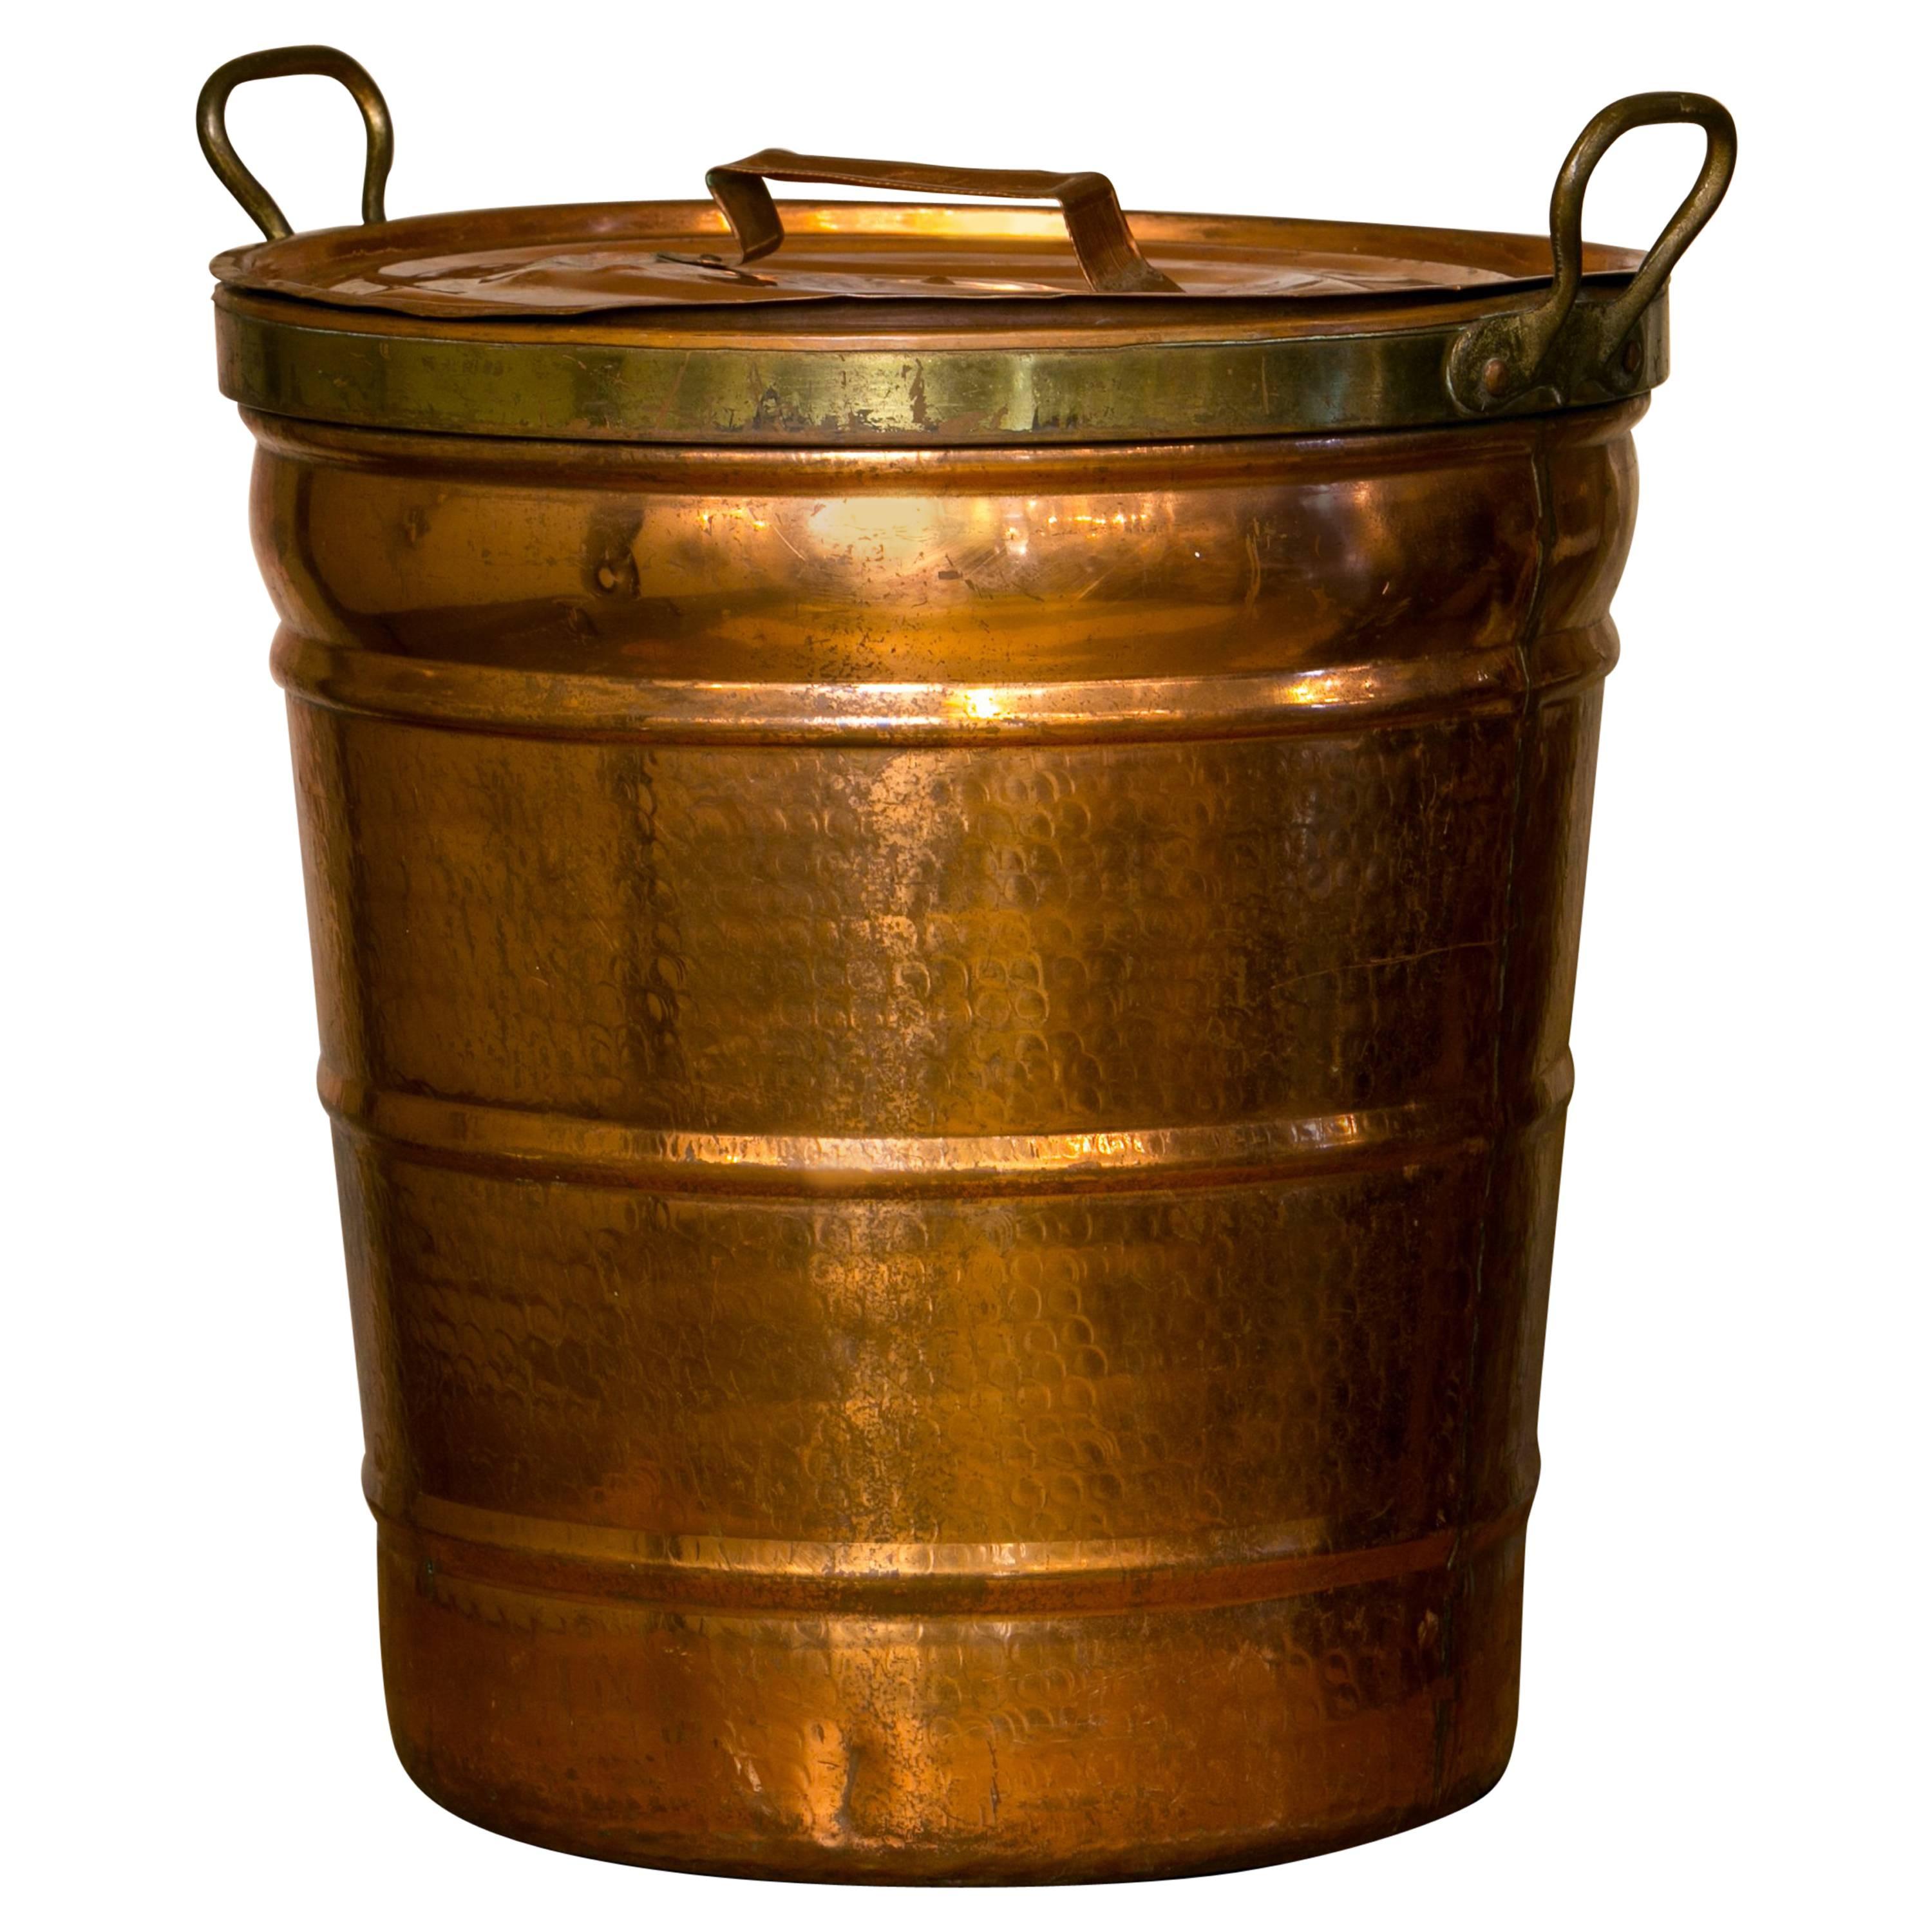 Handmade Hammered Copper Bucket with Lid